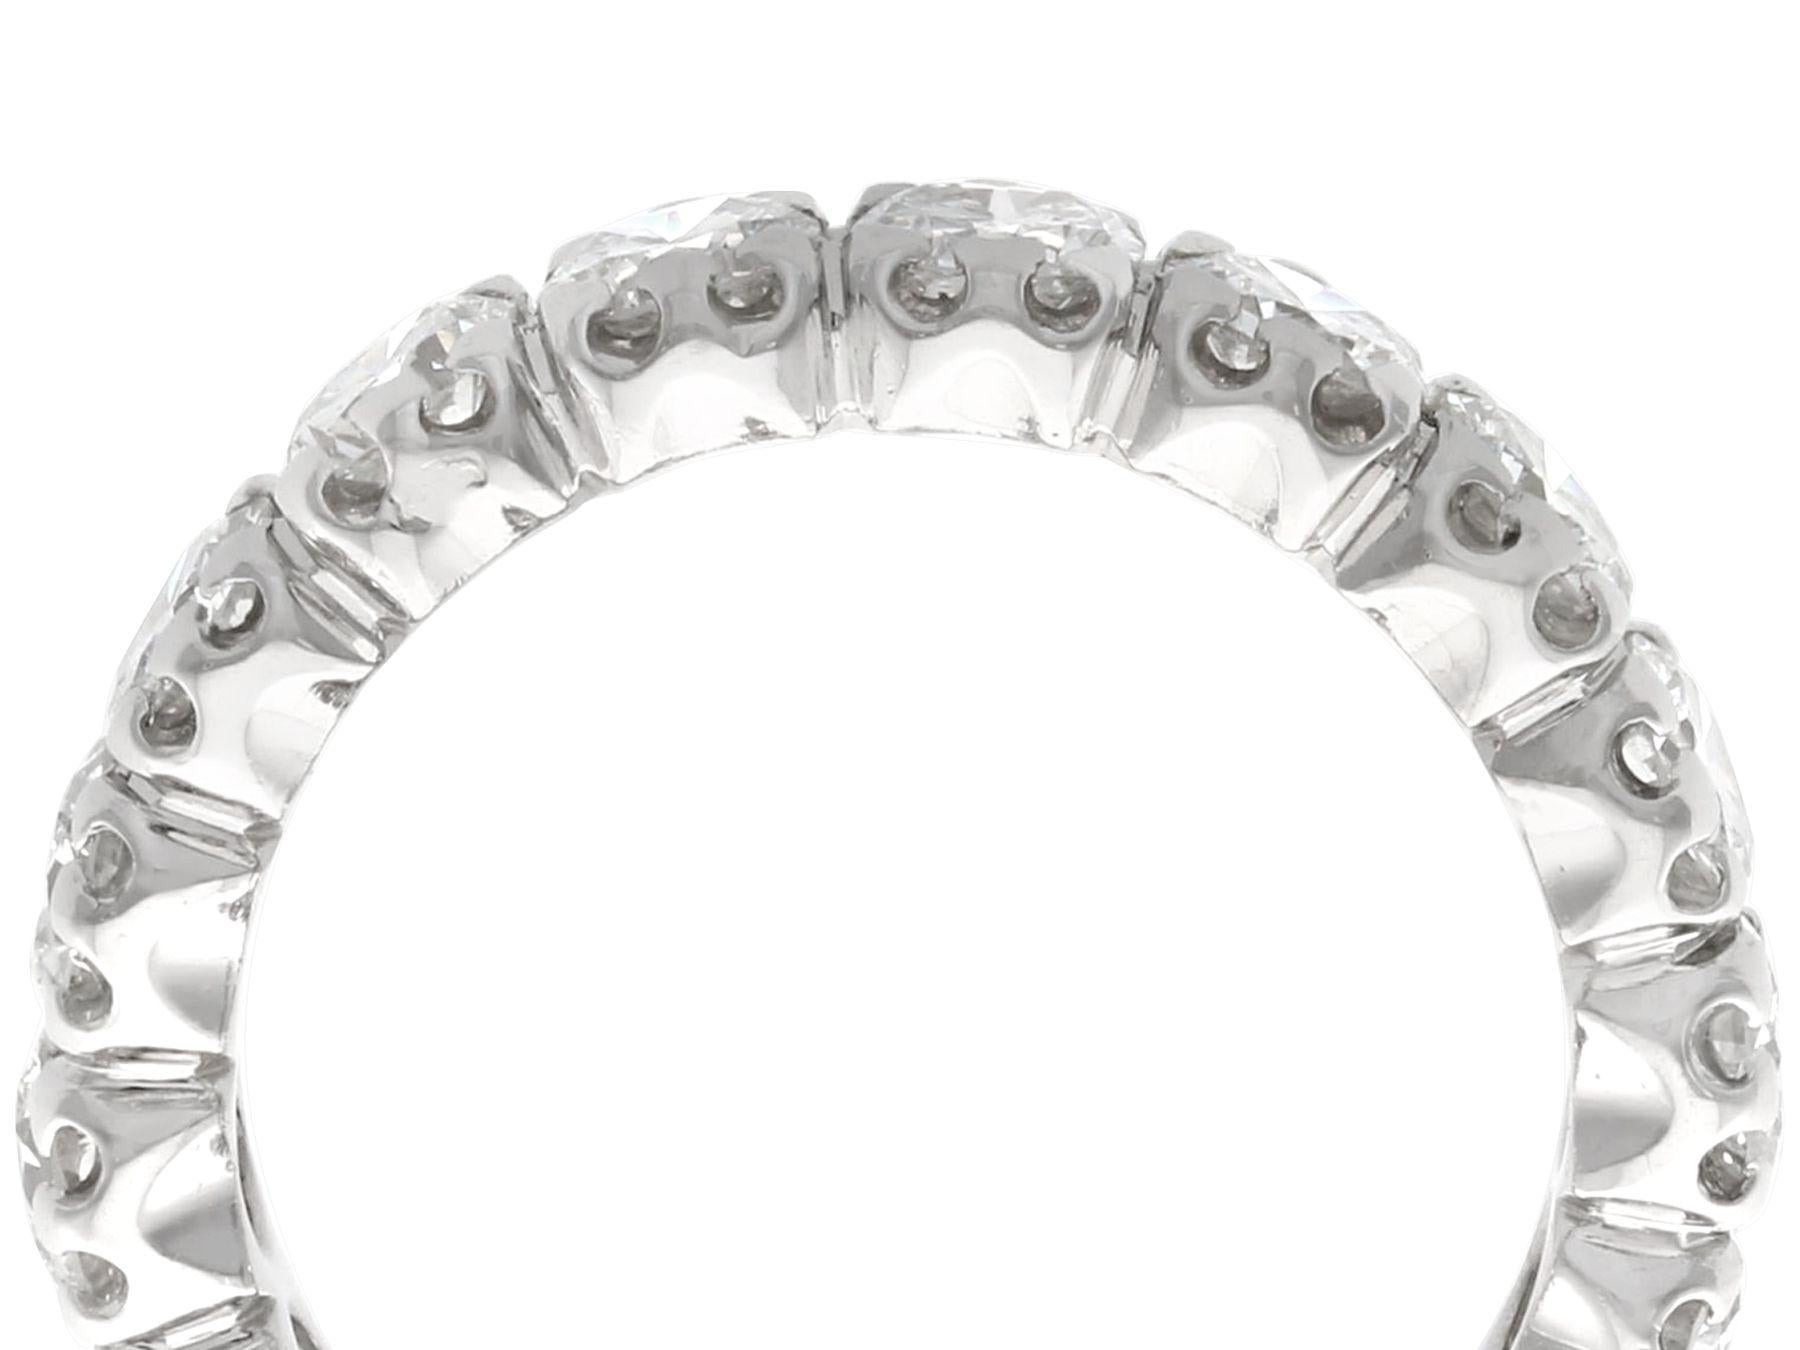 An impressive vintage French 2.20 carat diamond and 18 karat white gold full eternity ring; part of our diverse diamond jewelry and estate jewelry collections

This fine and impressive diamond full eternity ring has been crafted in 18k white